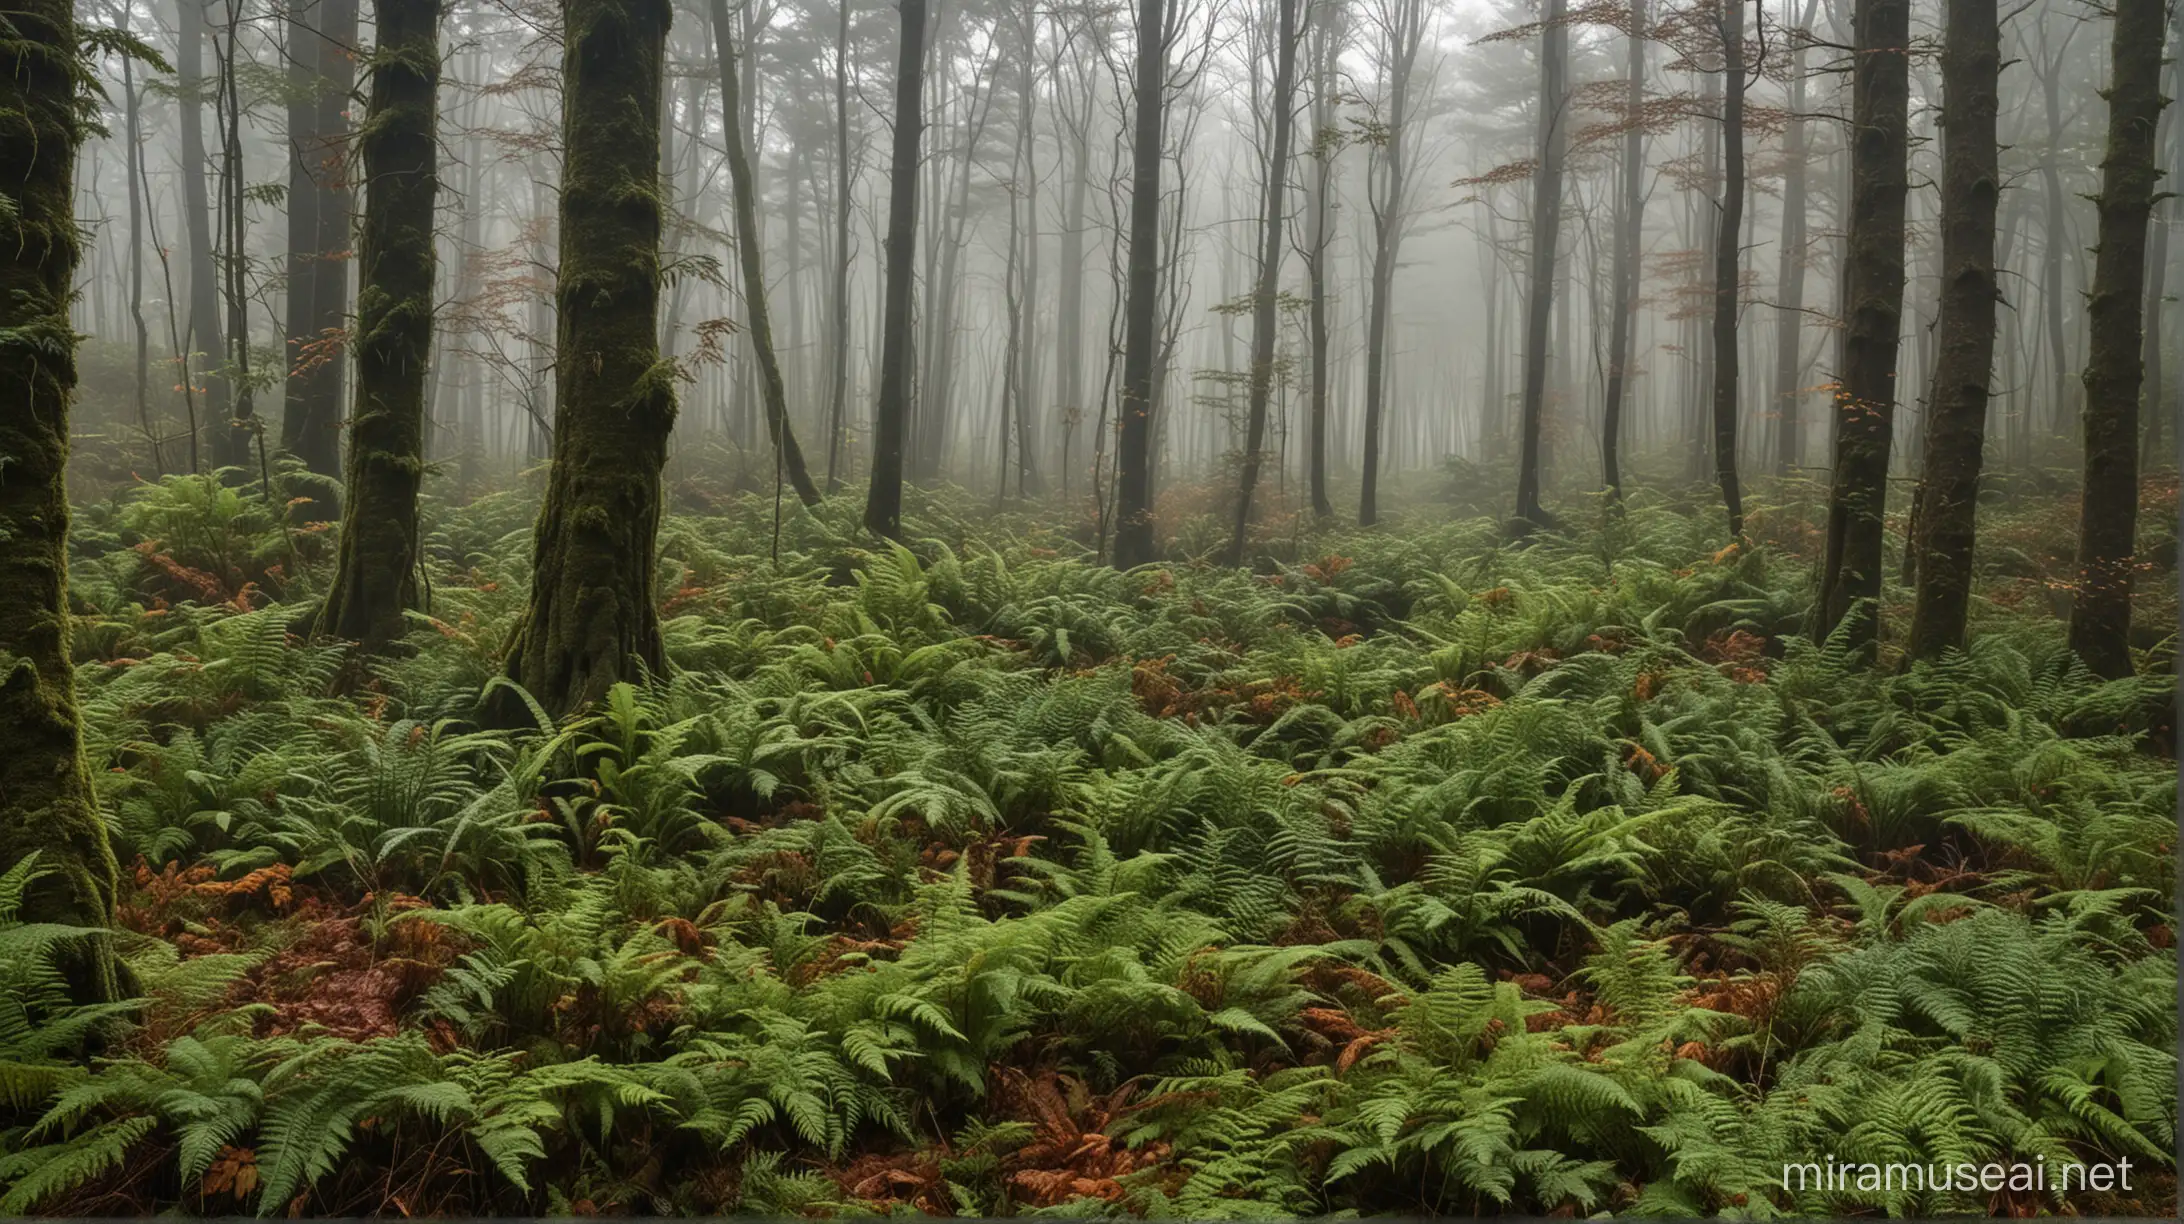 Misty Coniferous Forest with Ferns and Mossy Ground